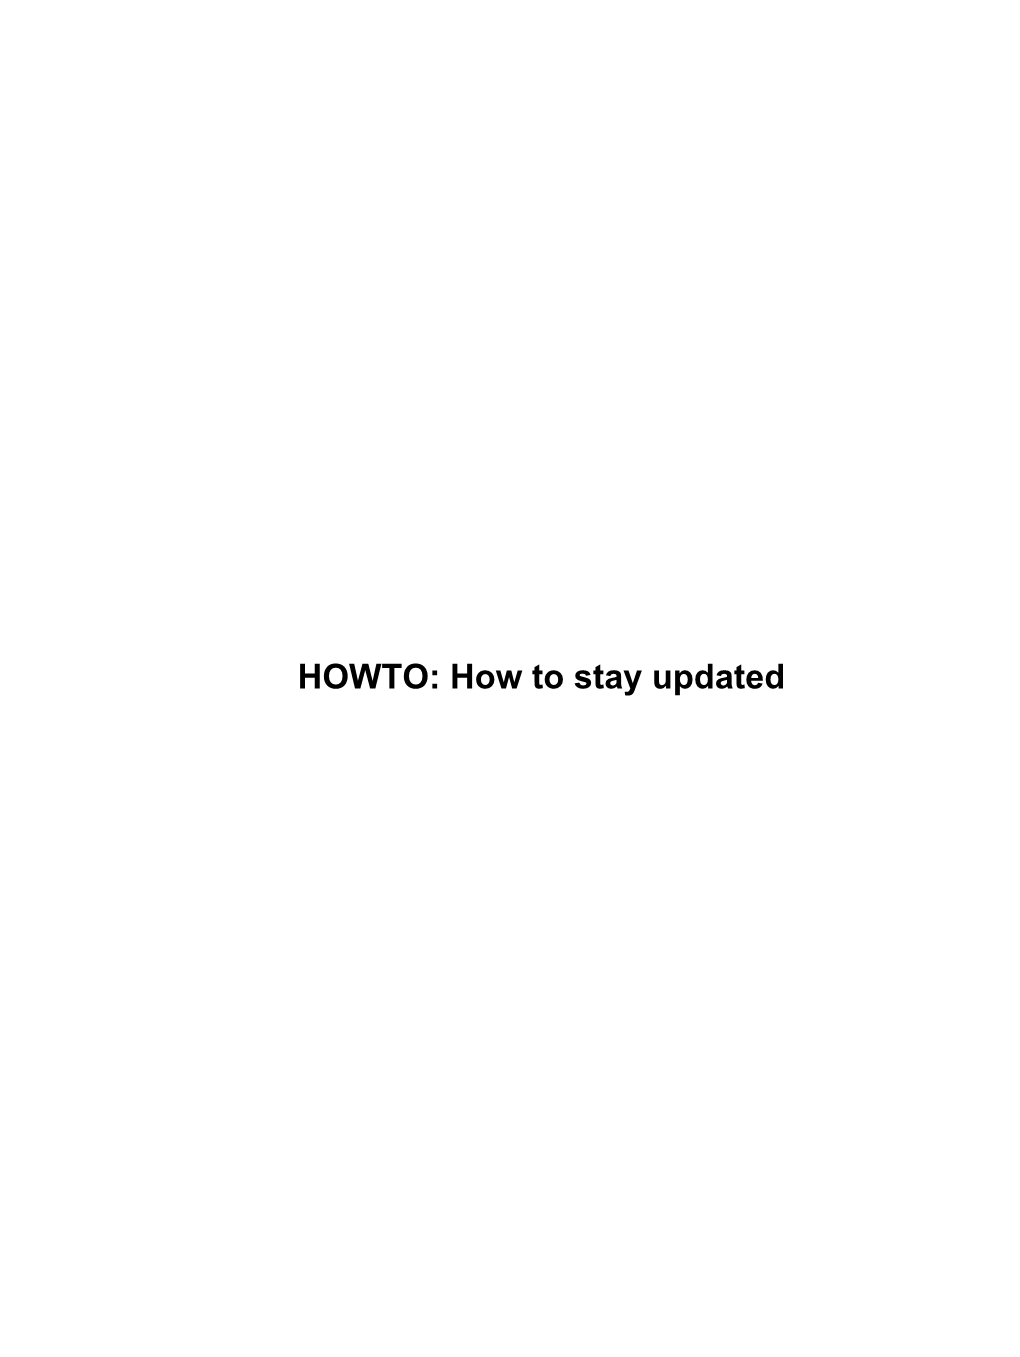 HOWTO: How to Stay Updated HOWTO: How to Stay Updated